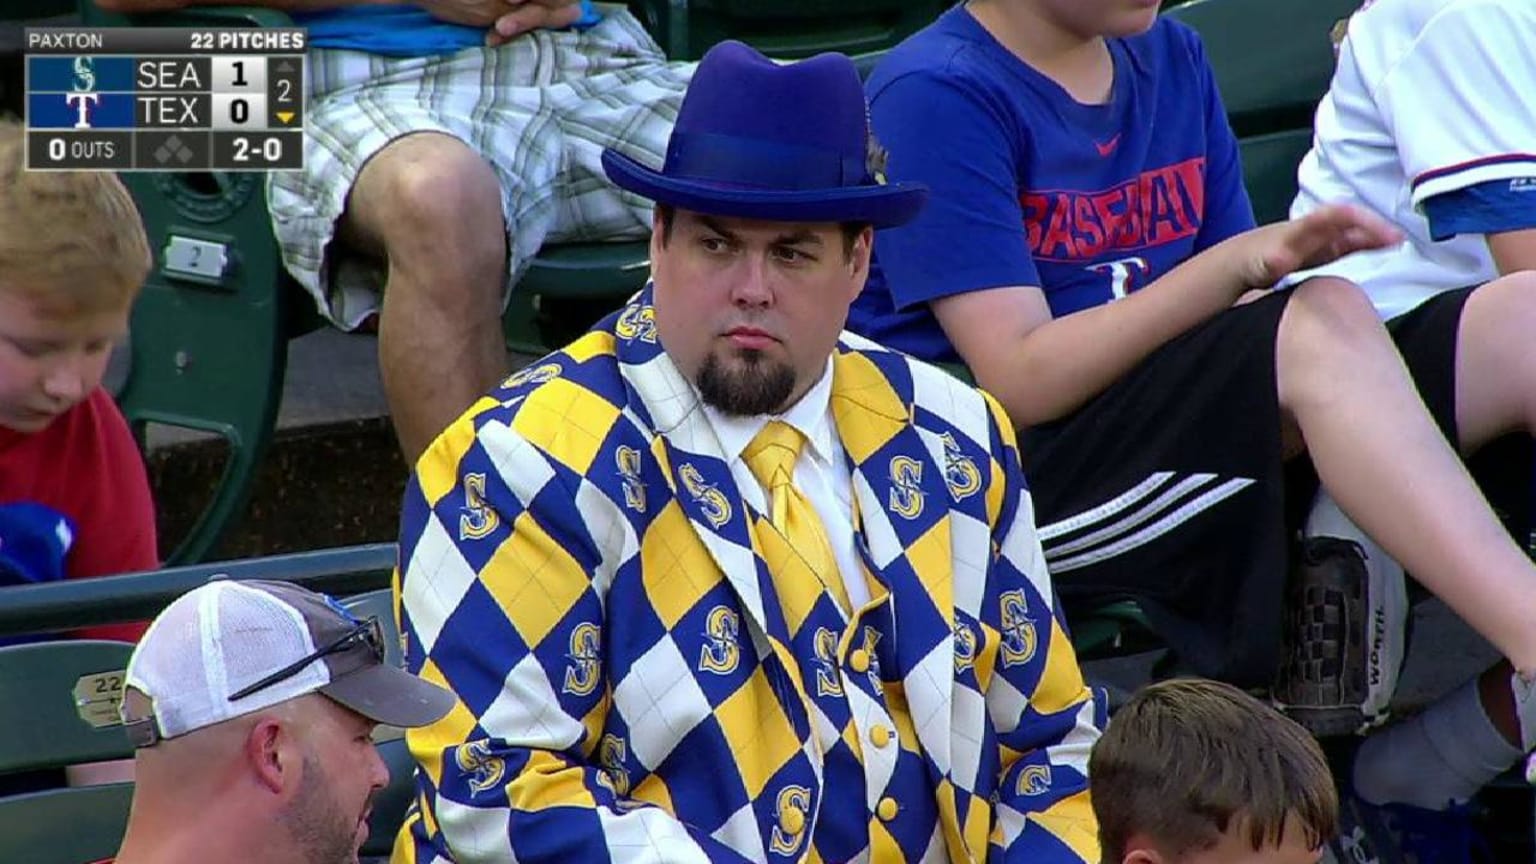 Fan dons Mariners suit in Texas | 06/16/2017 | MLB.com